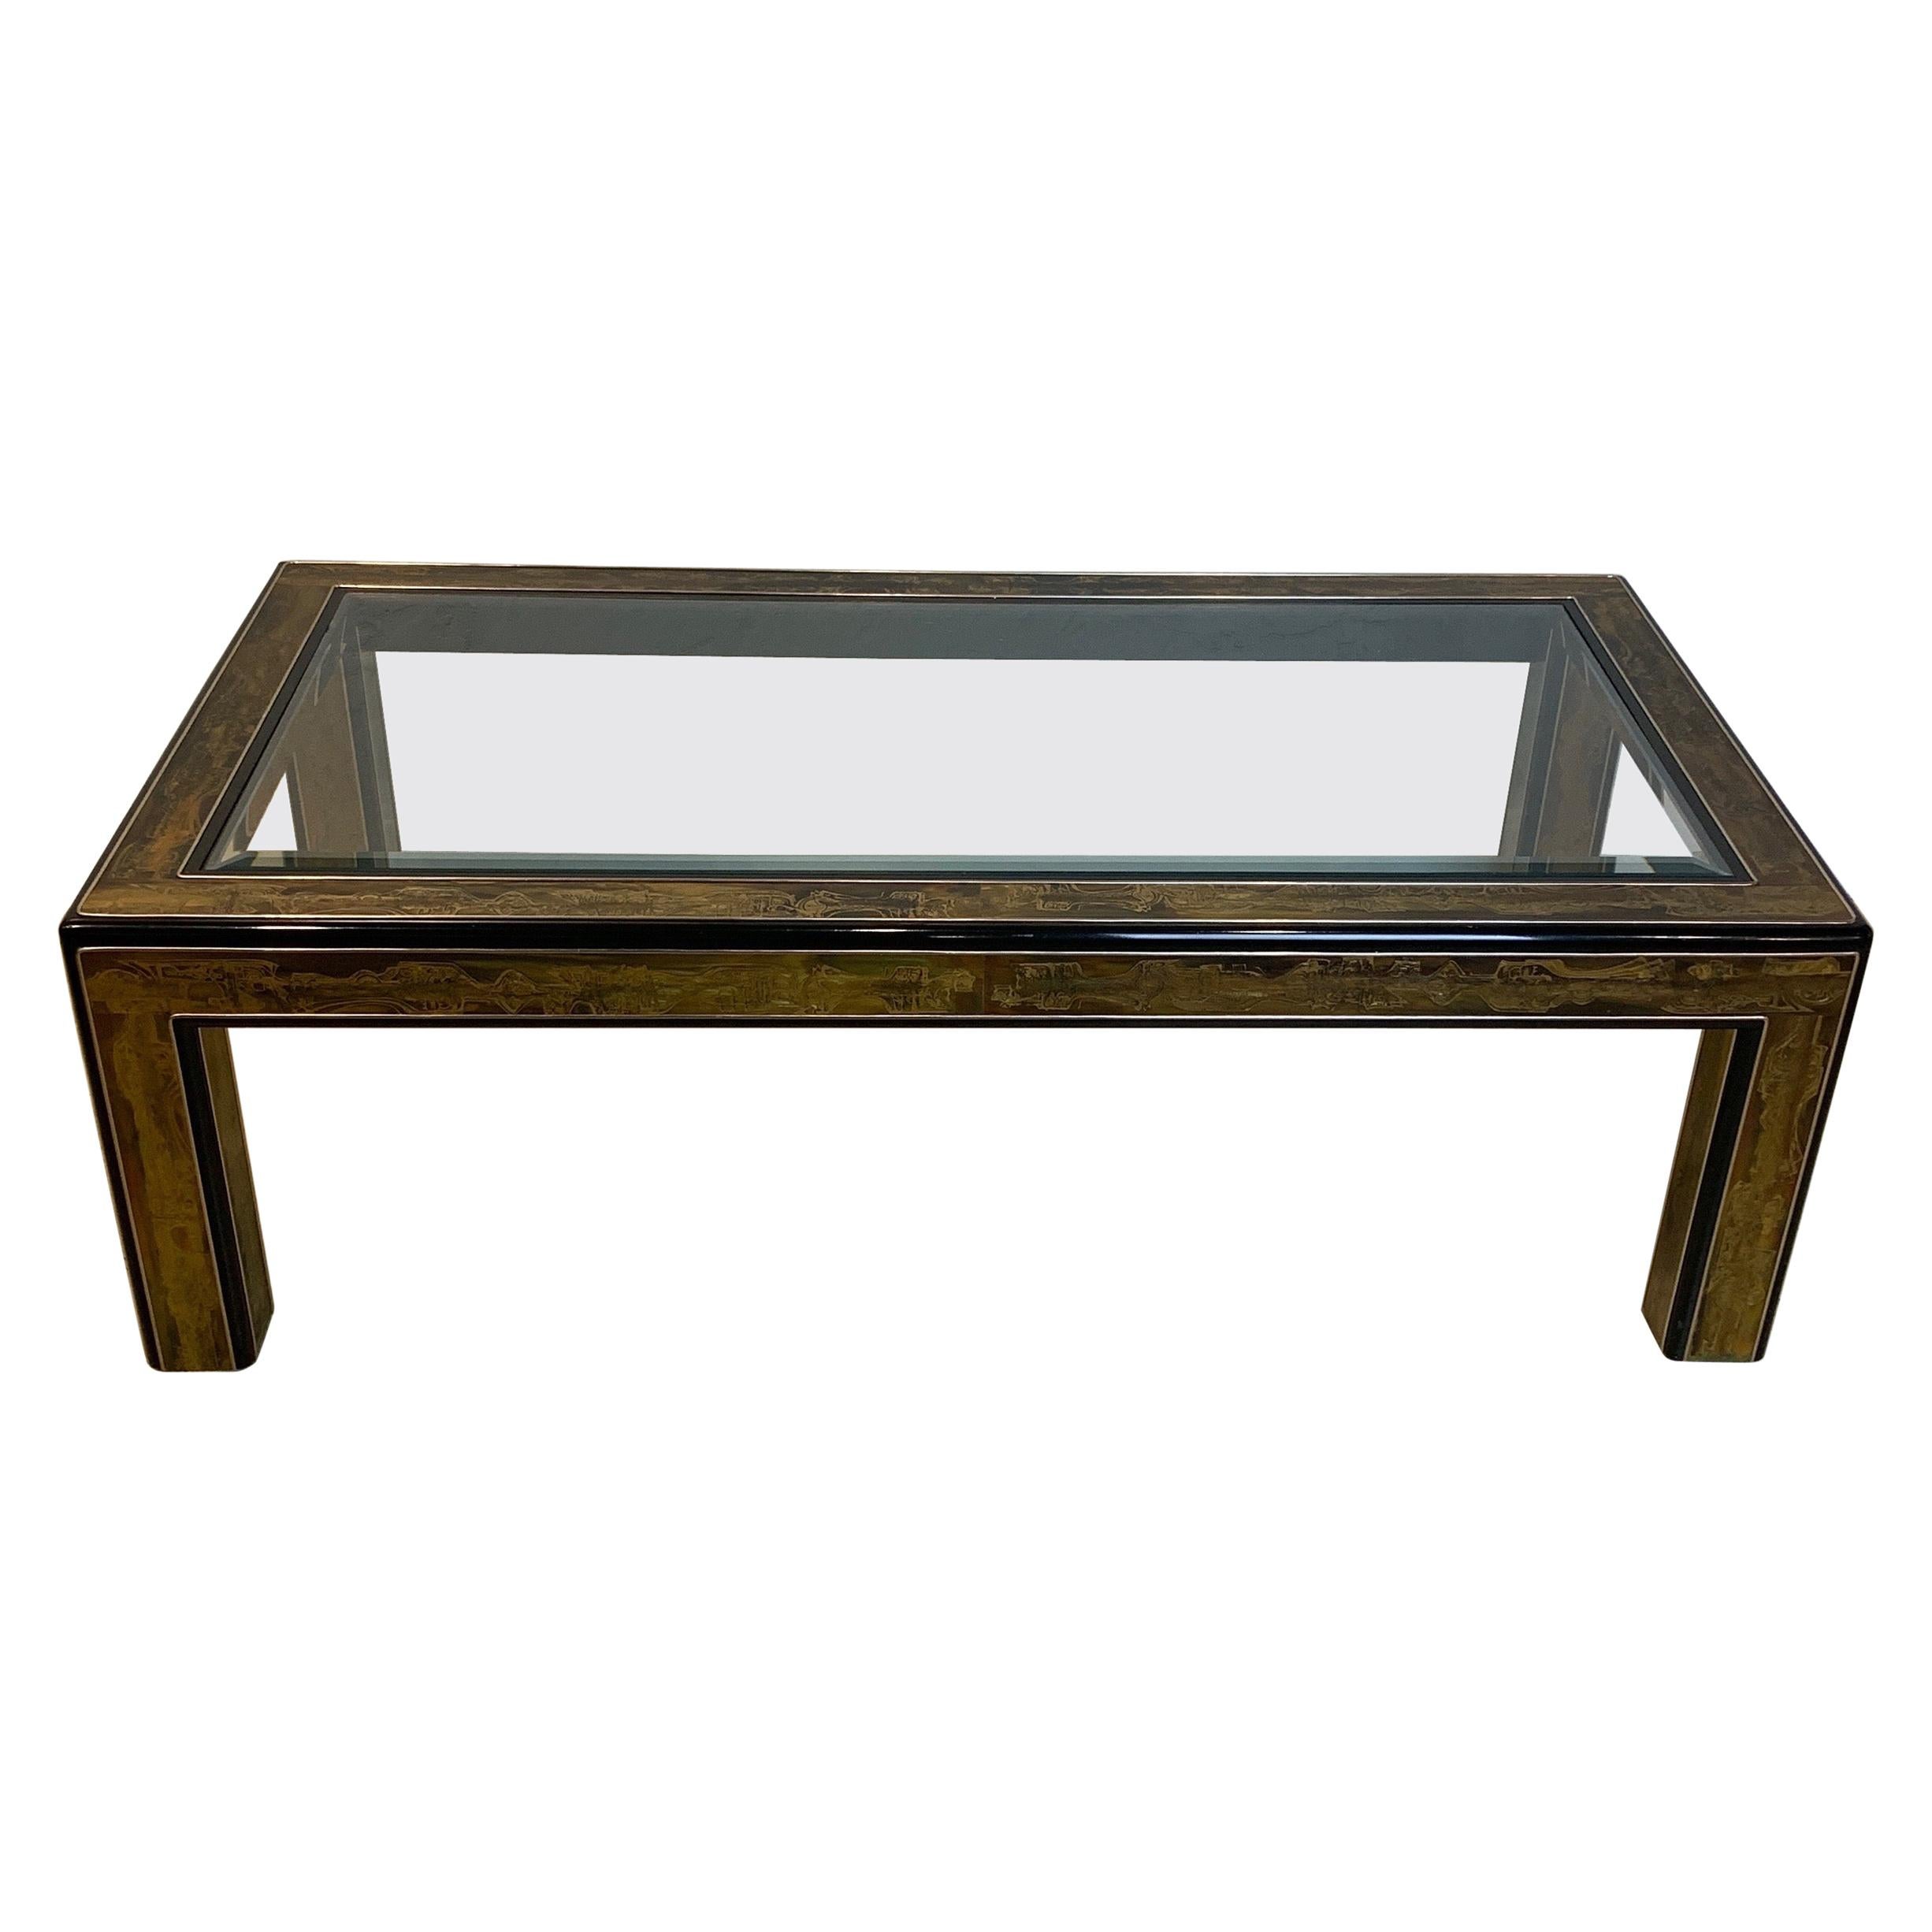 Bernhard Rohne for Mastercraft Acid Etched Brass Coffee Table